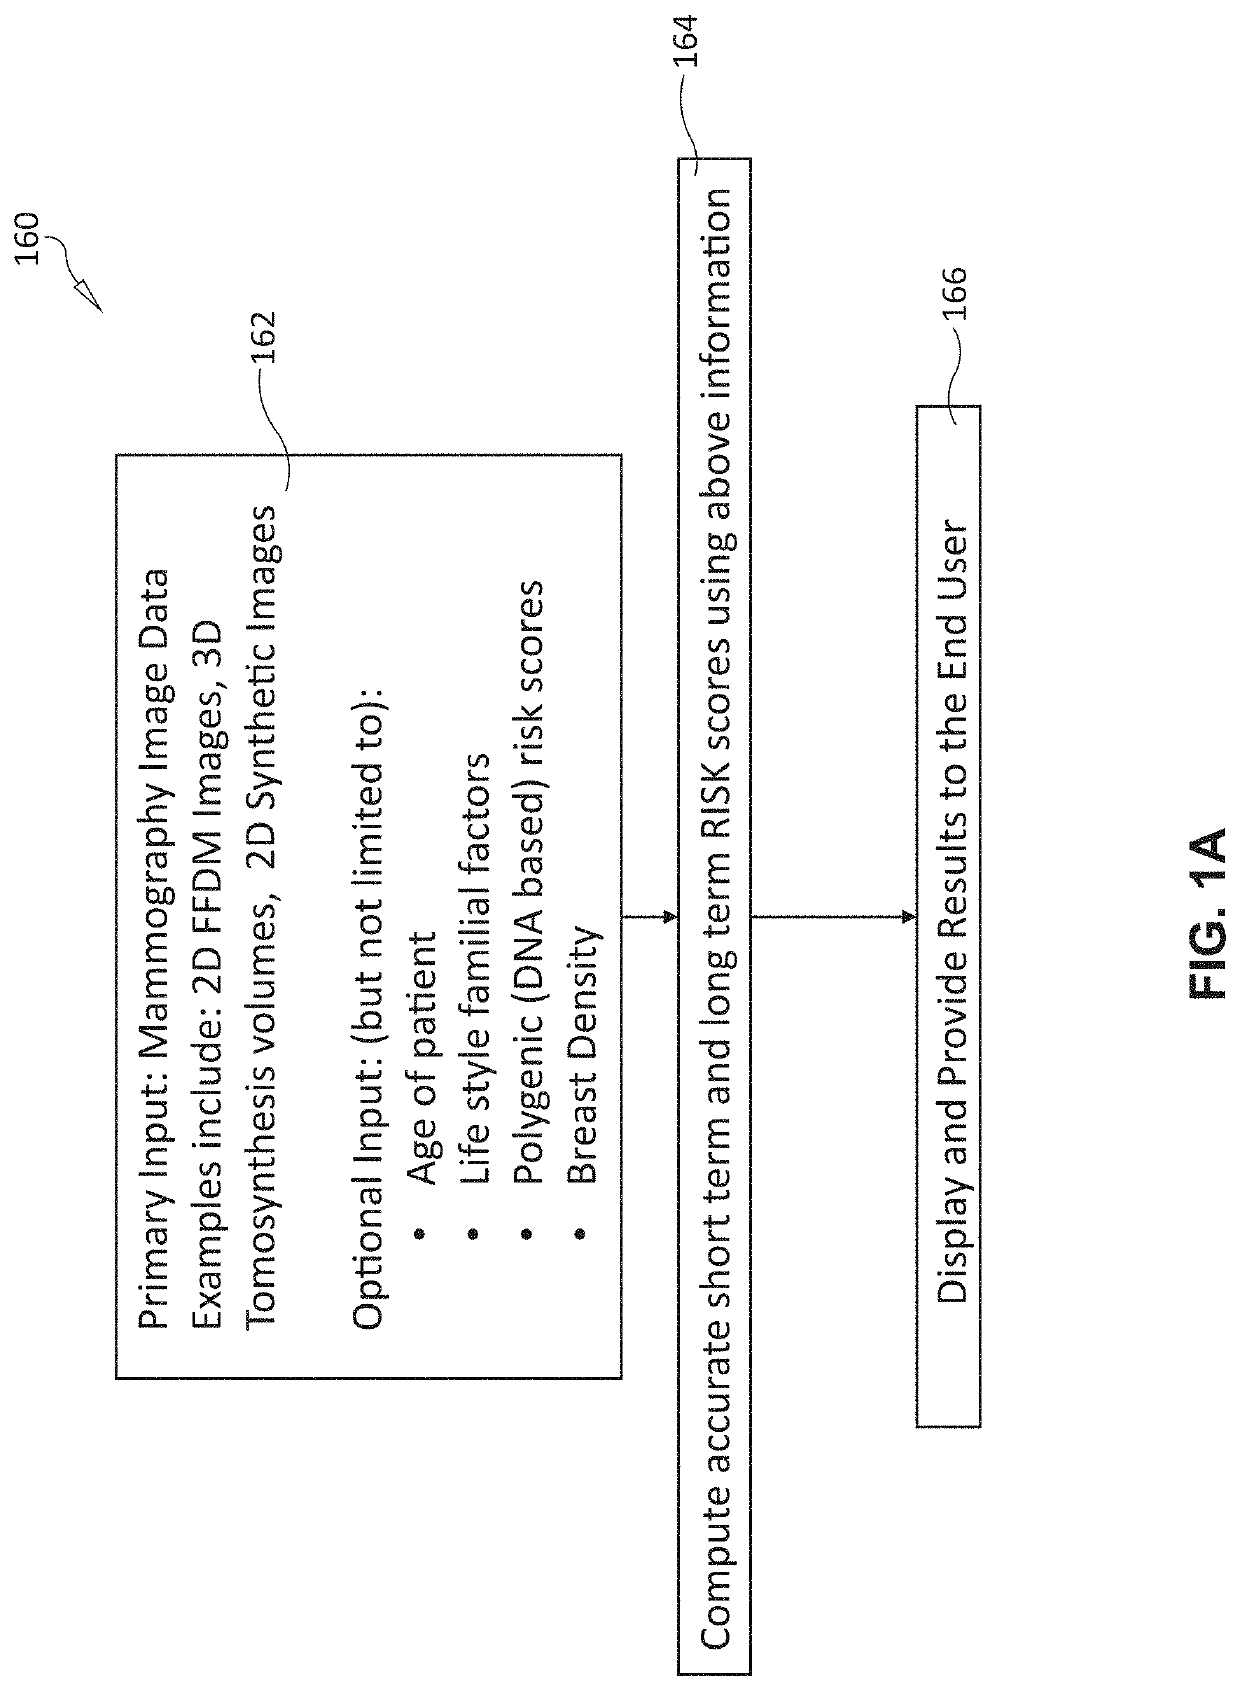 System and method for assessing breast cancer risk using imagery